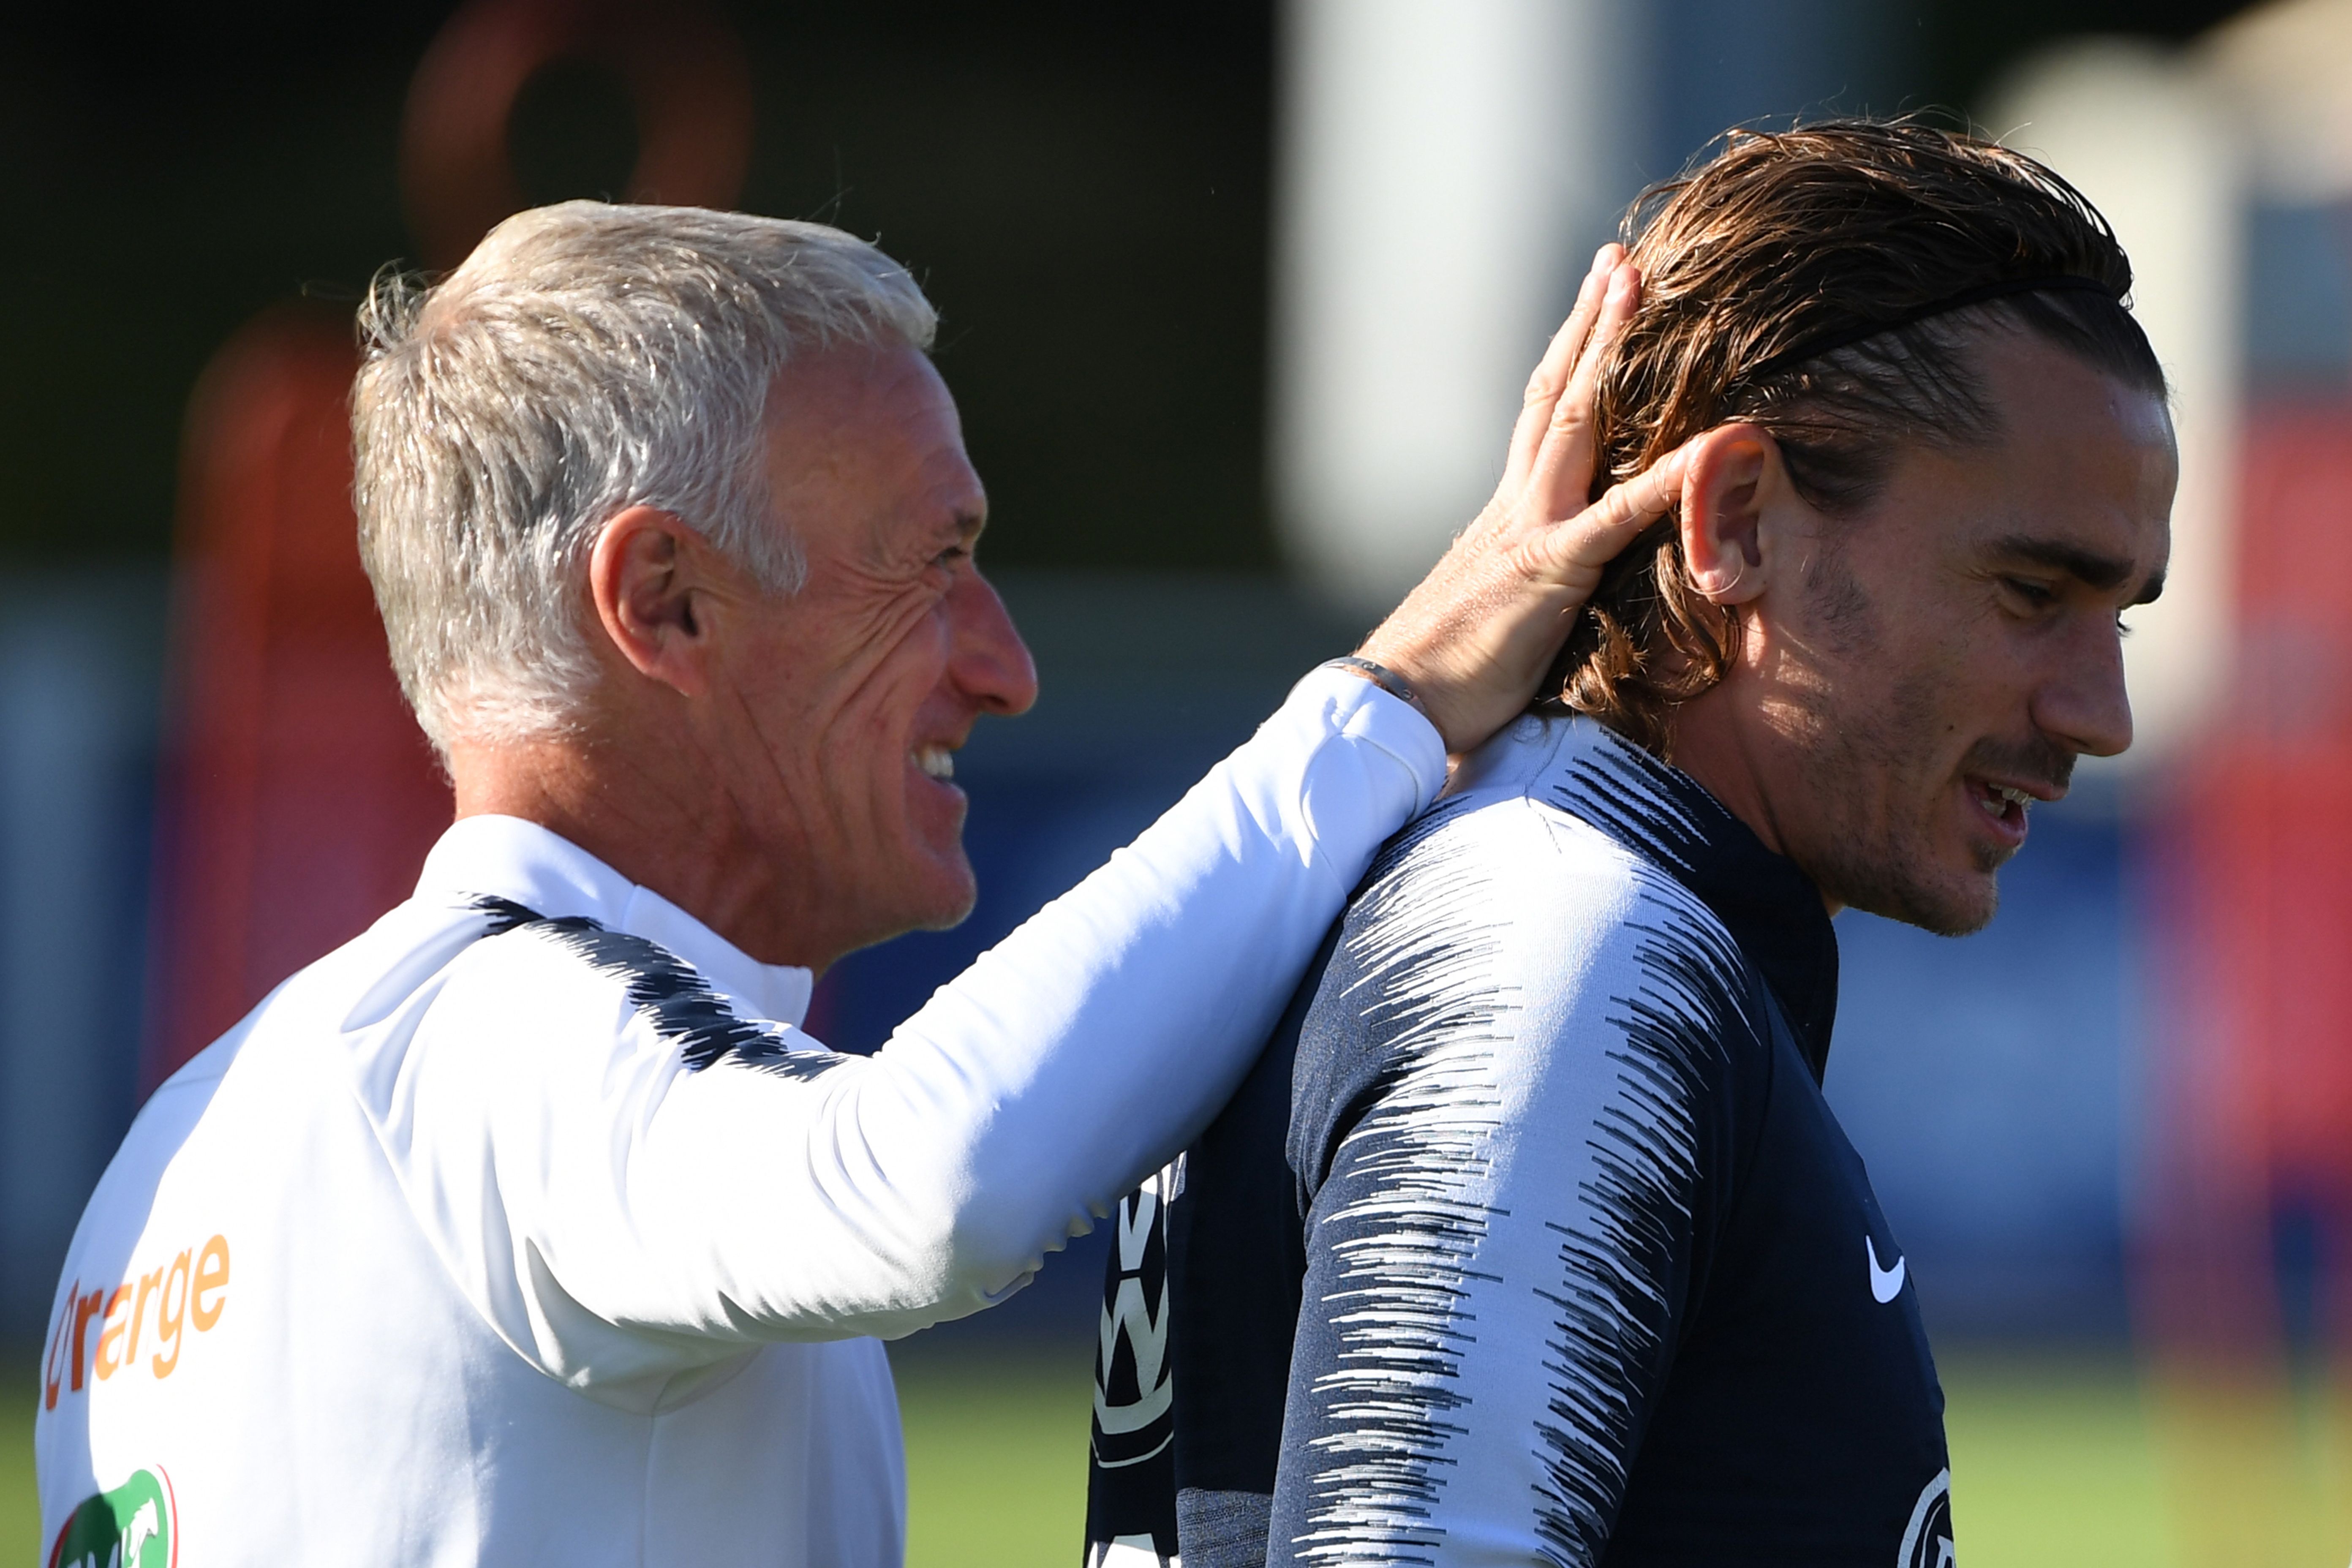 France's head coach Didier Deschamps (L) shares a laugh with France's forward Antoine Griezmann takes part in a training session at the French national football team training base in Clairefontaine-en-Yvelines on September 3, 2019, as part of the team's preparation for the upcoming Euro-2020 qualifiers matches. (Photo by MARTIN BUREAU / AFP)        (Photo credit should read MARTIN BUREAU/AFP/Getty Images)